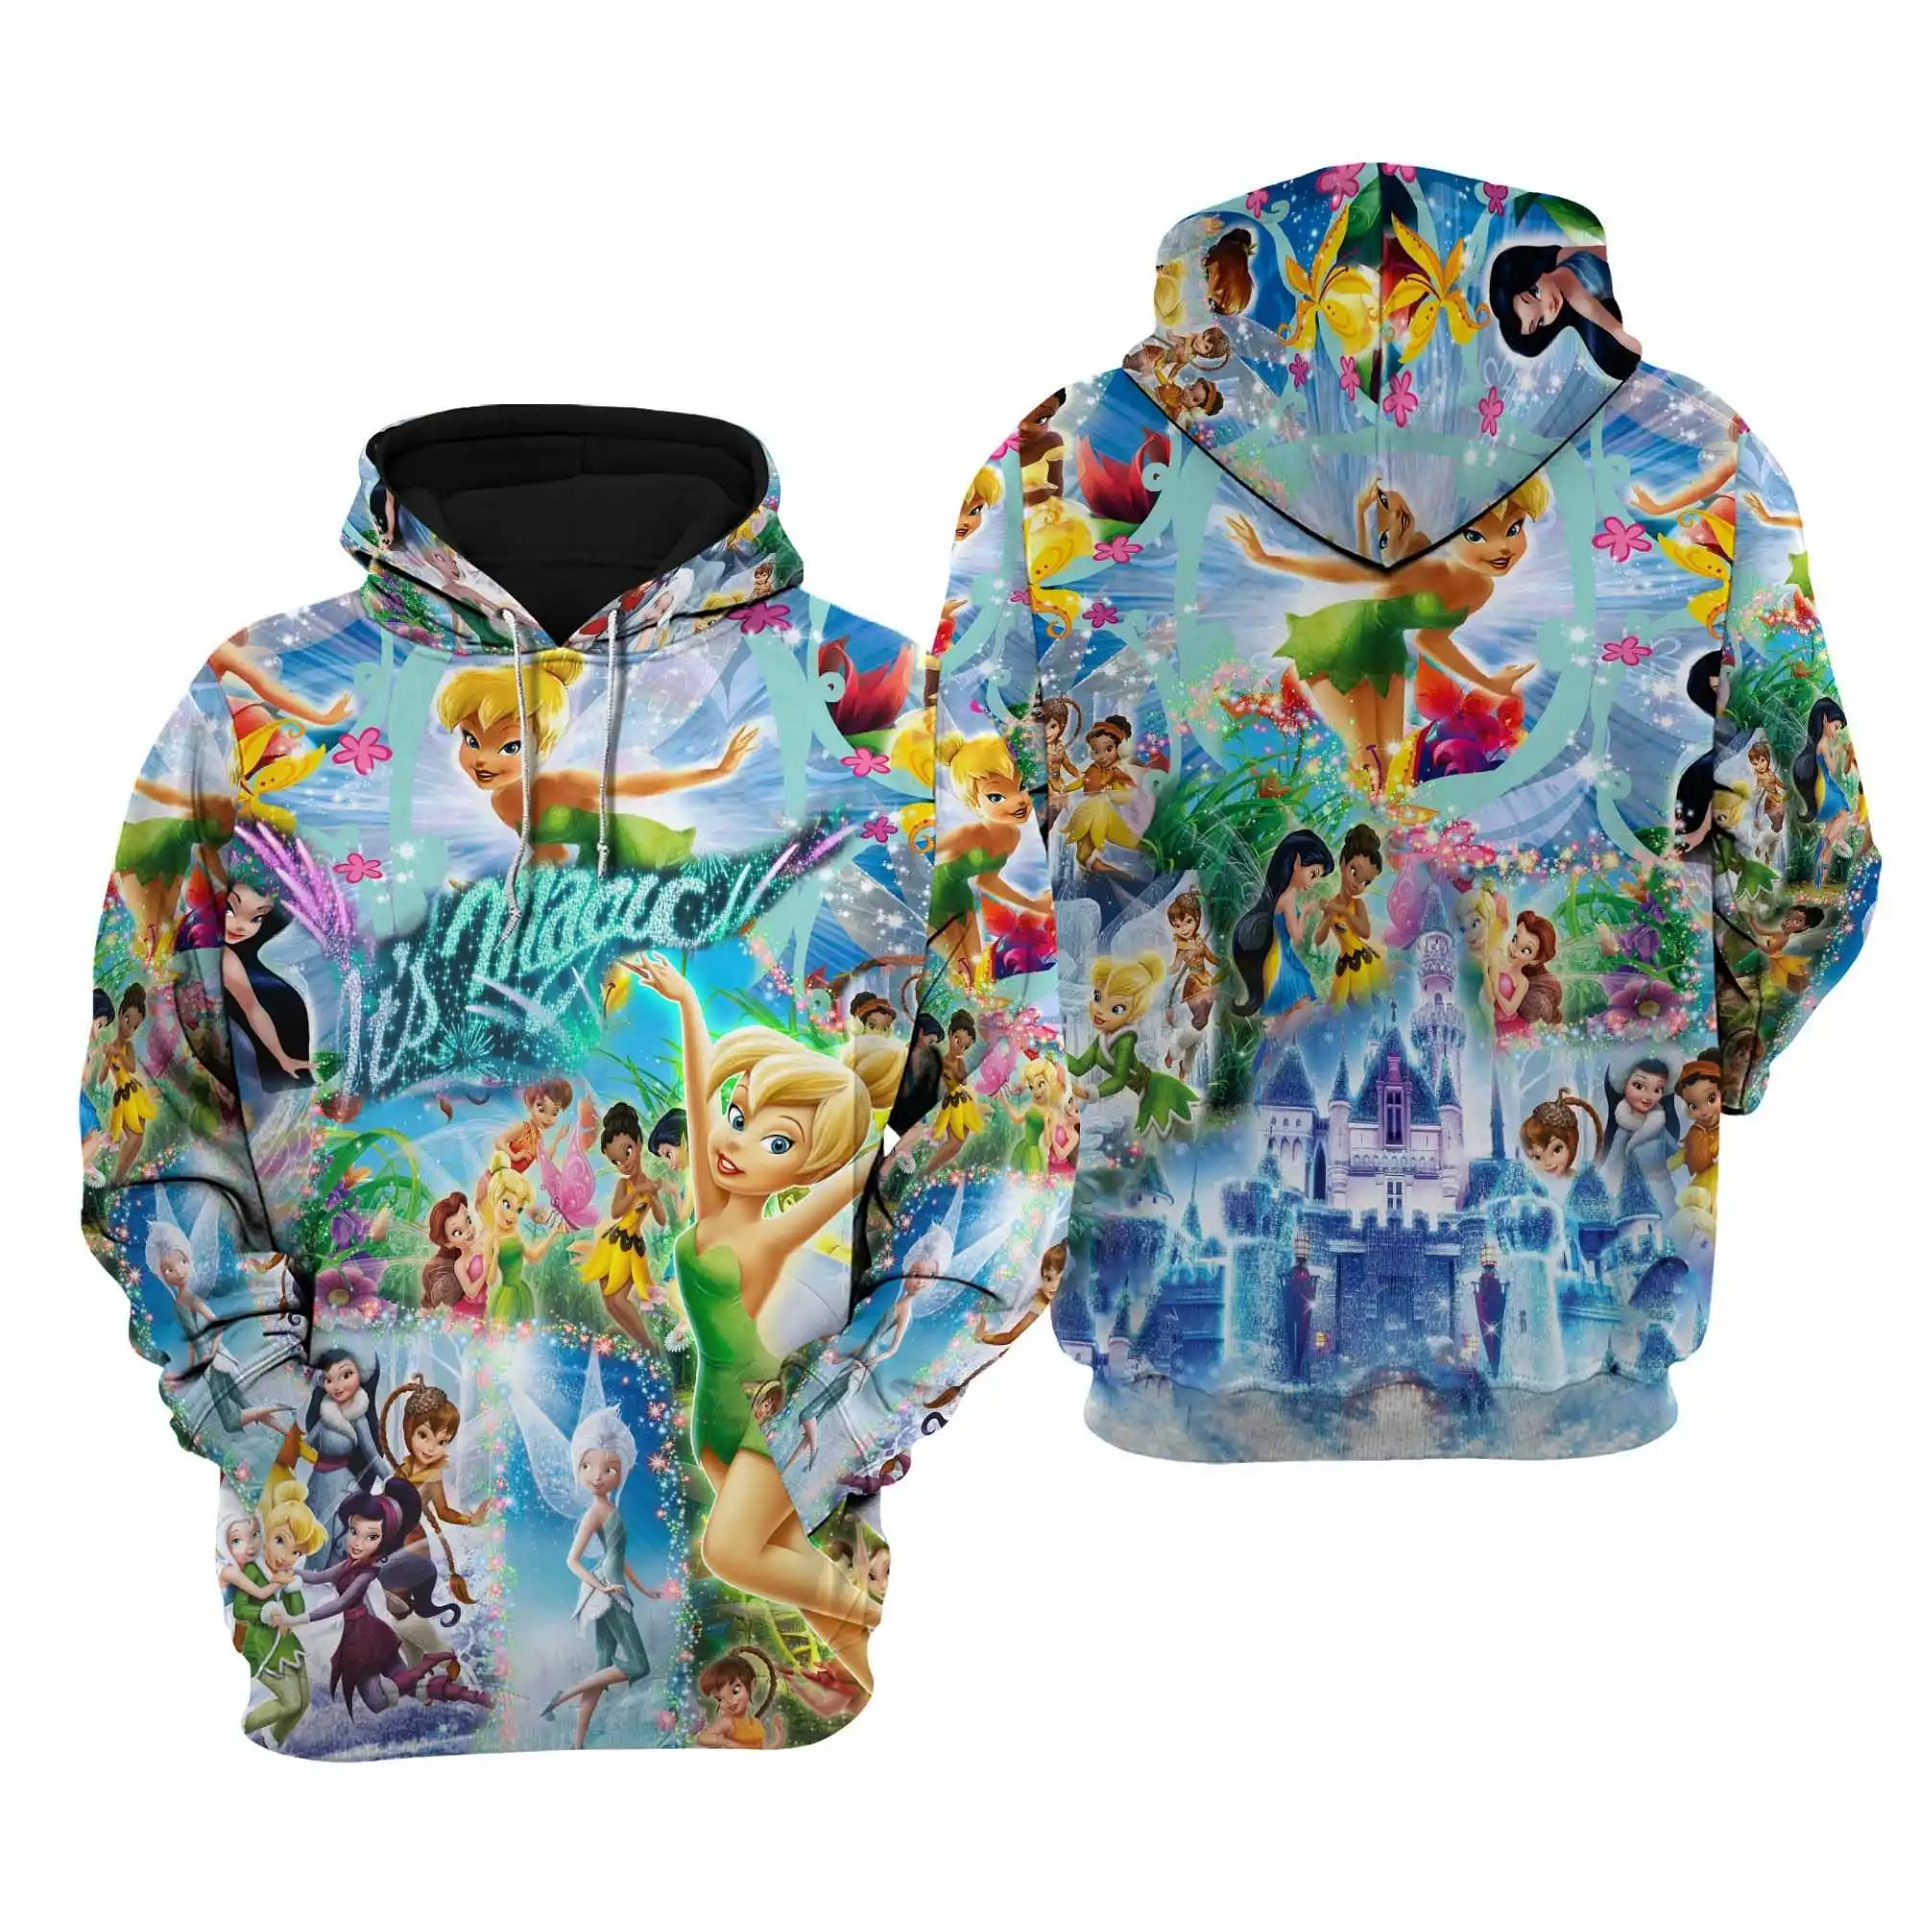 Tinker Bell Magical Glitter Castle Disney Cartoon Graphic Outfits Clothing Men Women Kids Toddlers Hoodie 3D